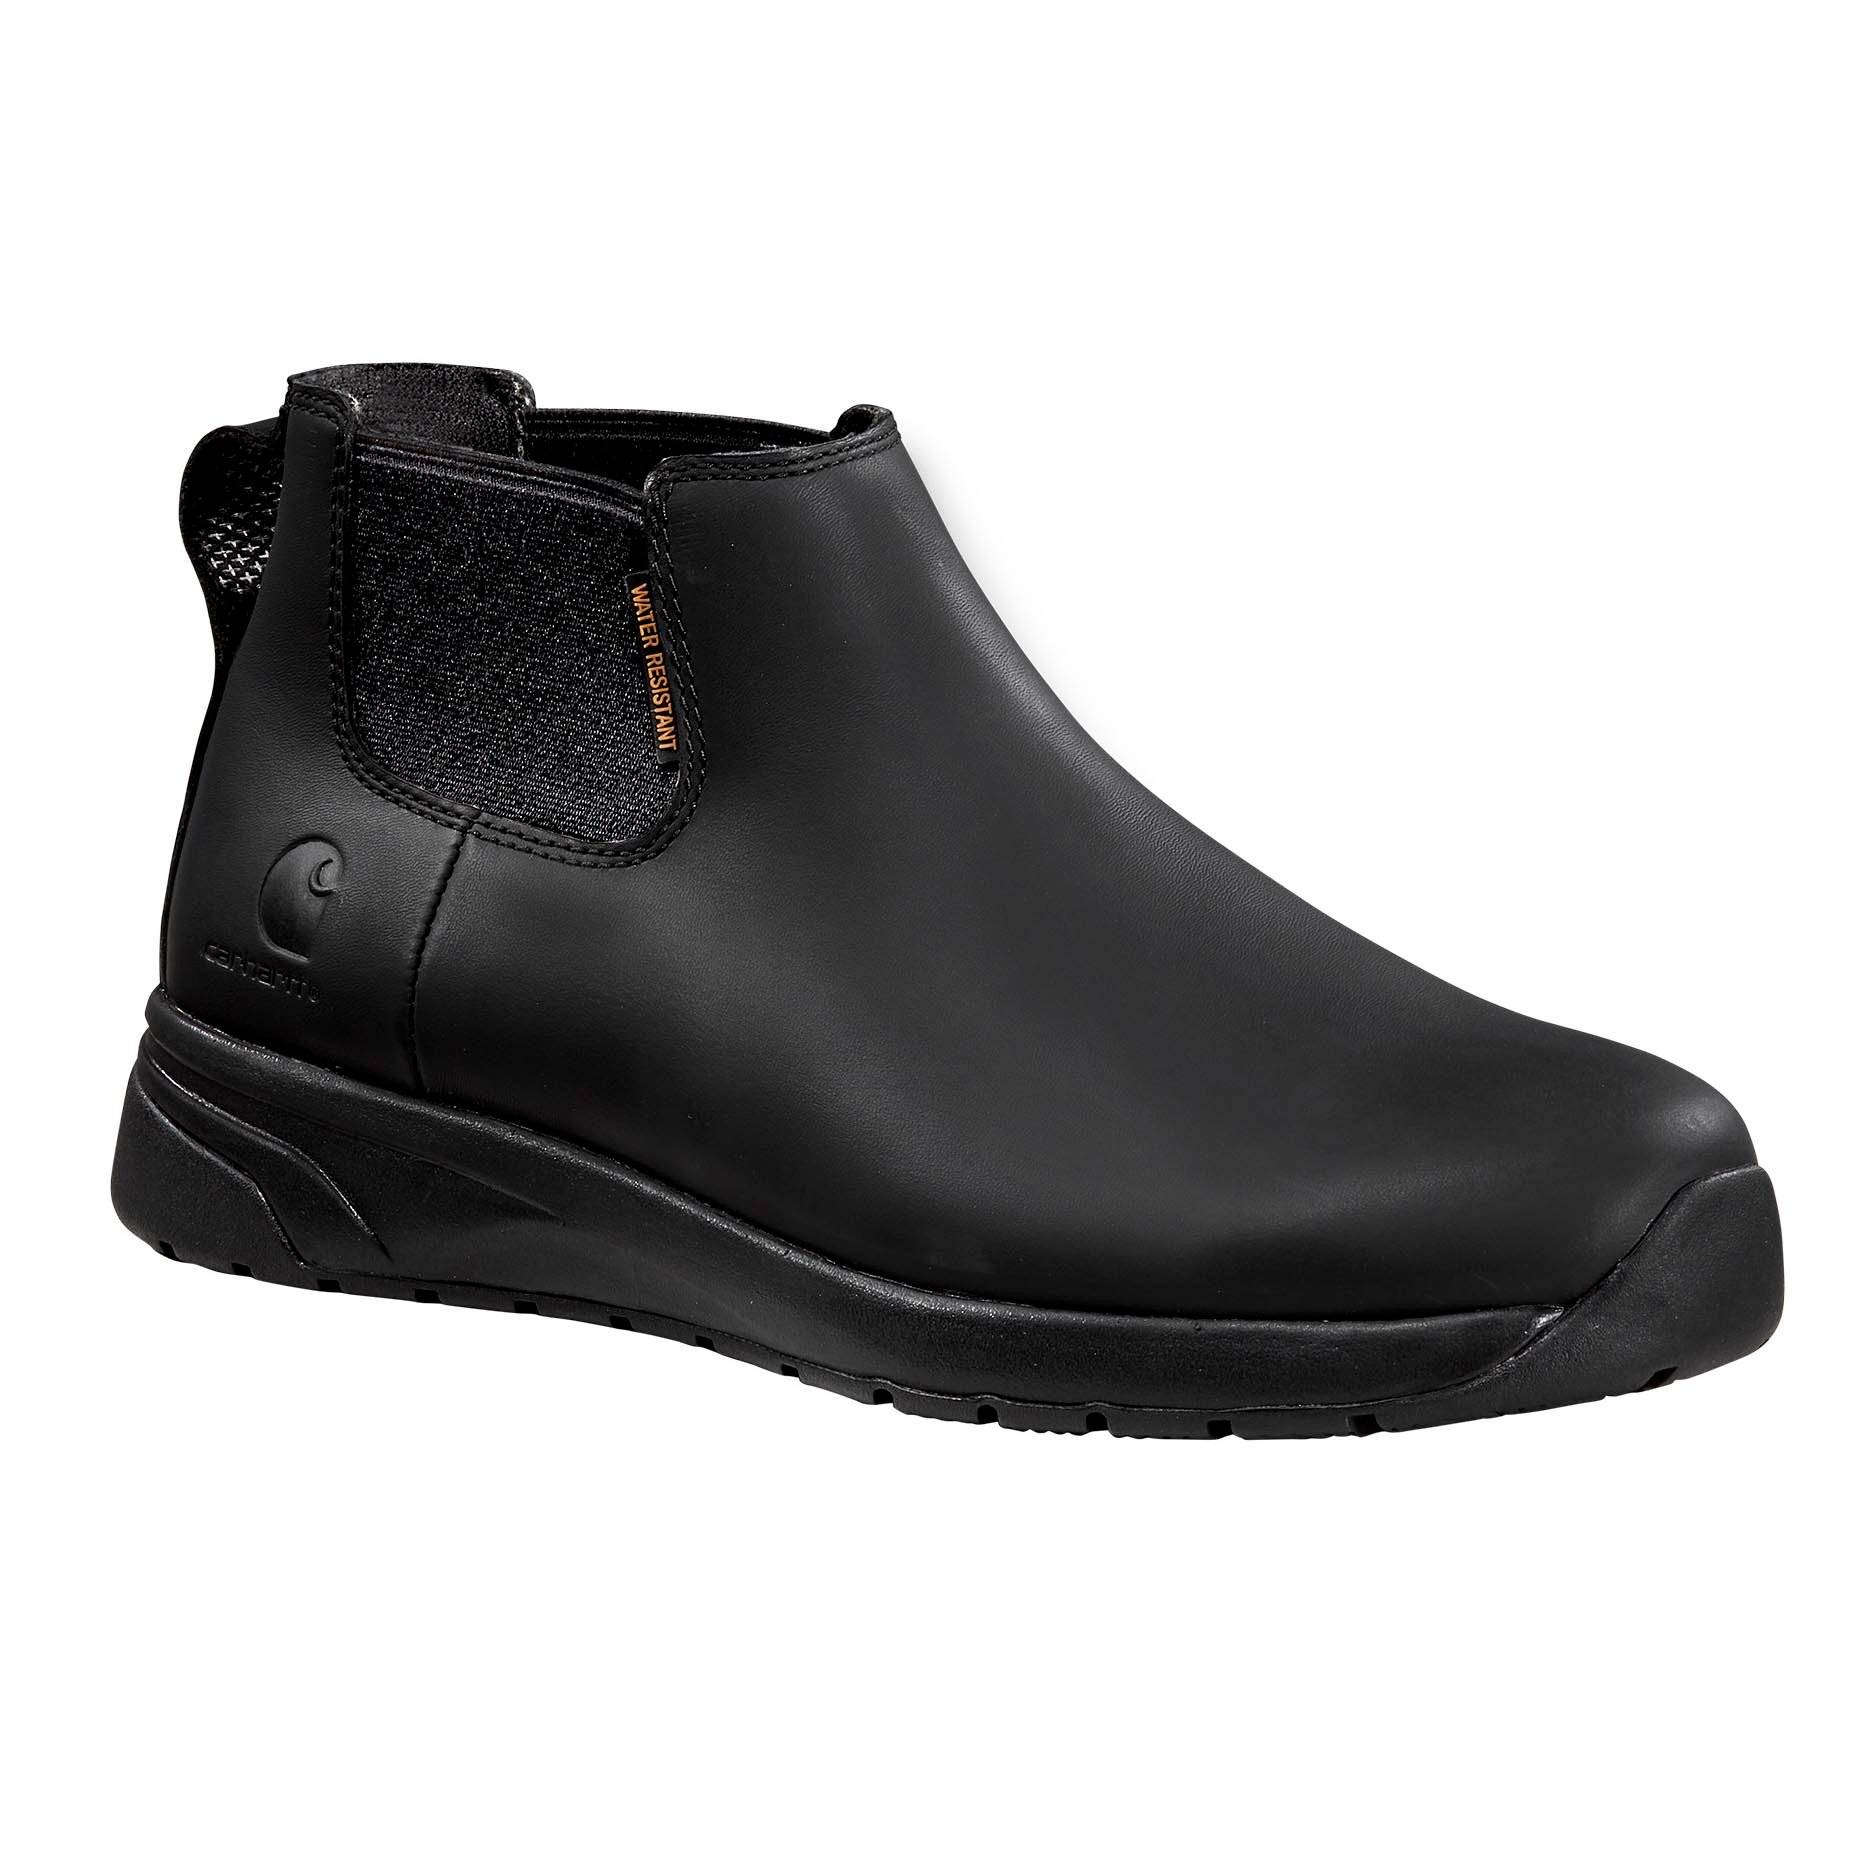 Carhartt Force 4" Water Resistant Romeo Boots